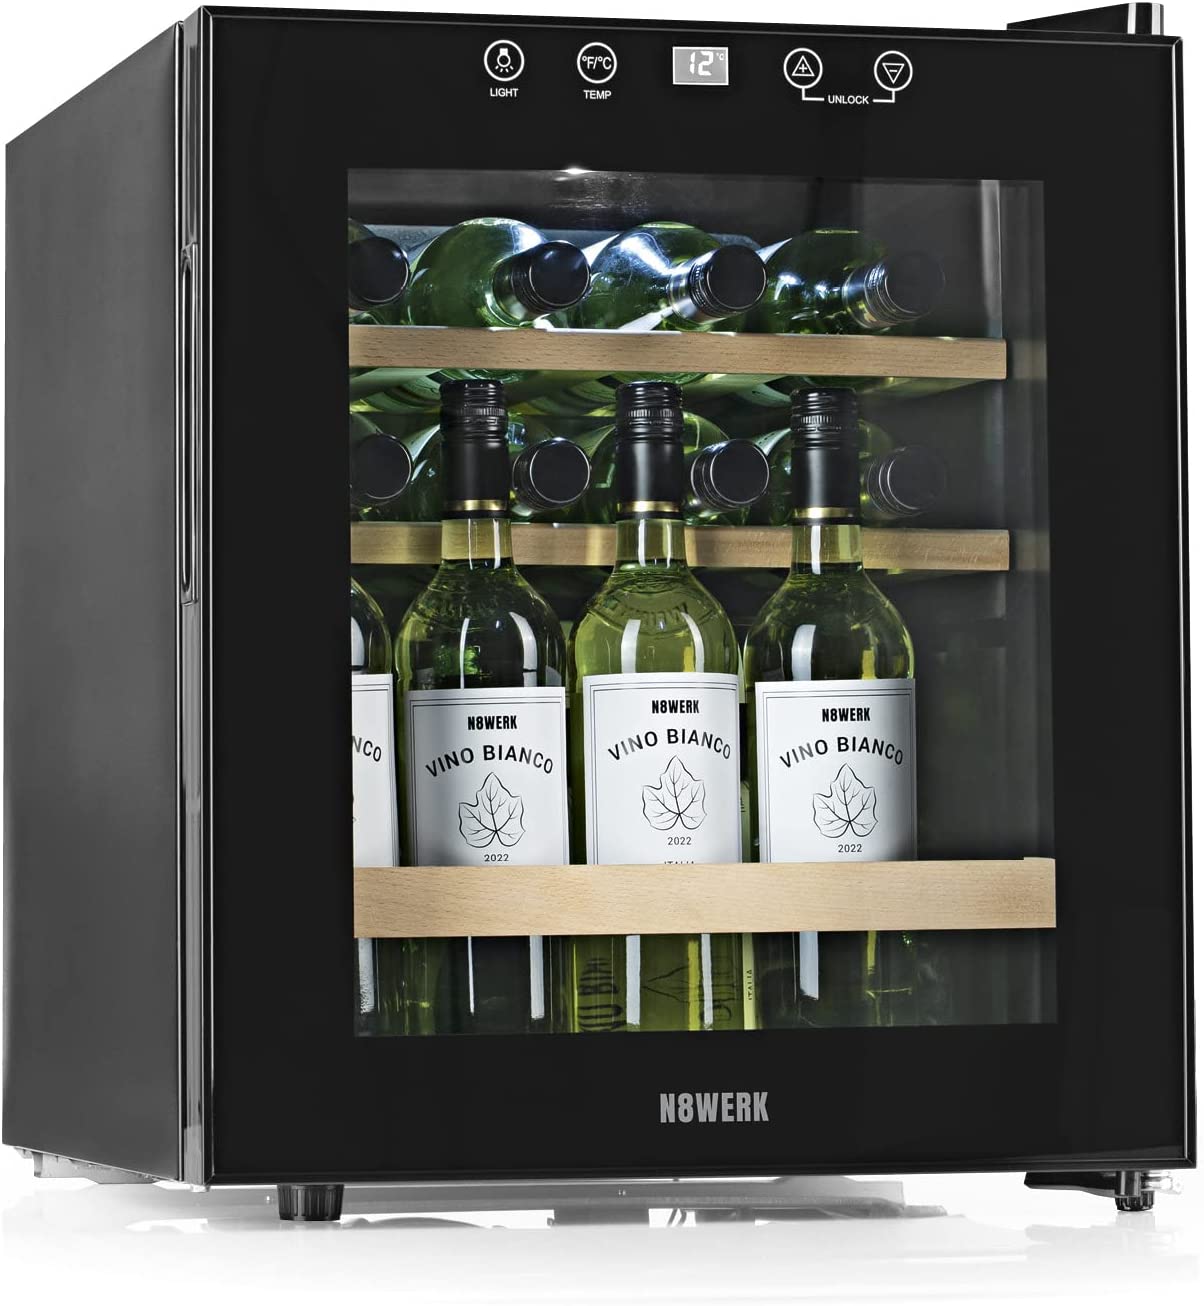 N8WERK Wine fridge for up to 15 bottles of wine, quiet compress technology, free-standing, temperature range 4 °C - 18 °C, with thermal glazing, LCD display, LED lighting